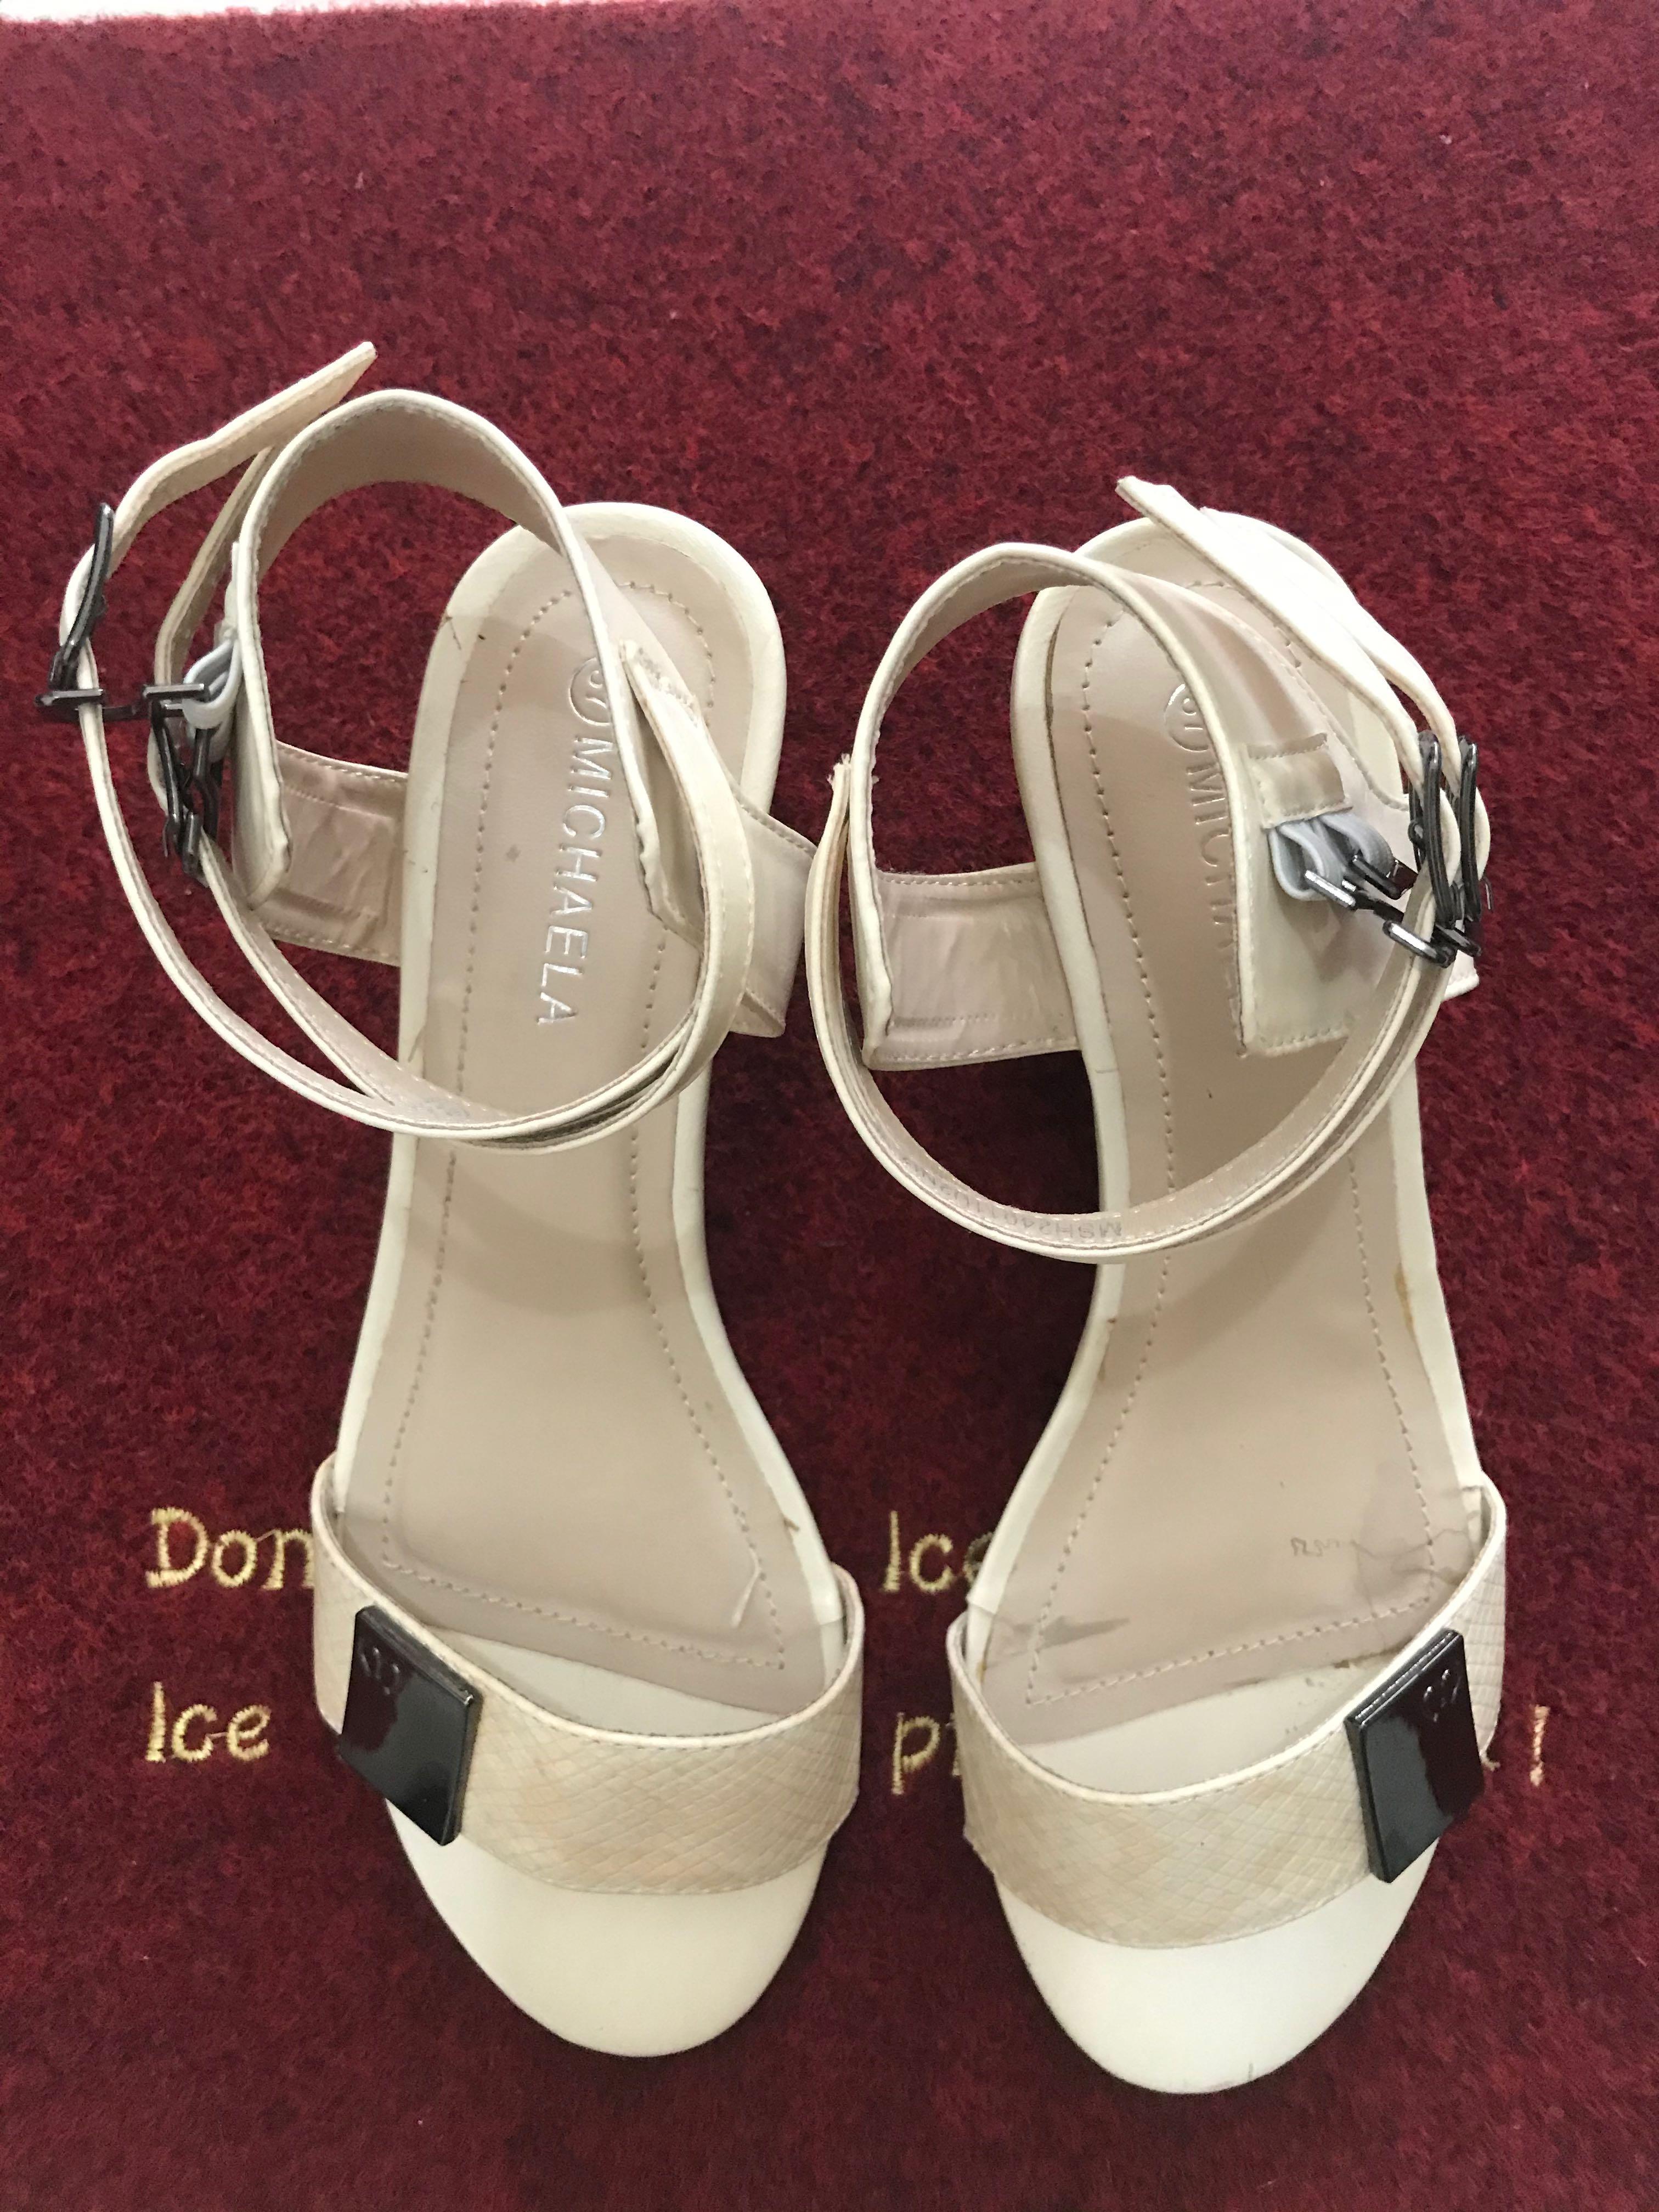 nude shoes size 7